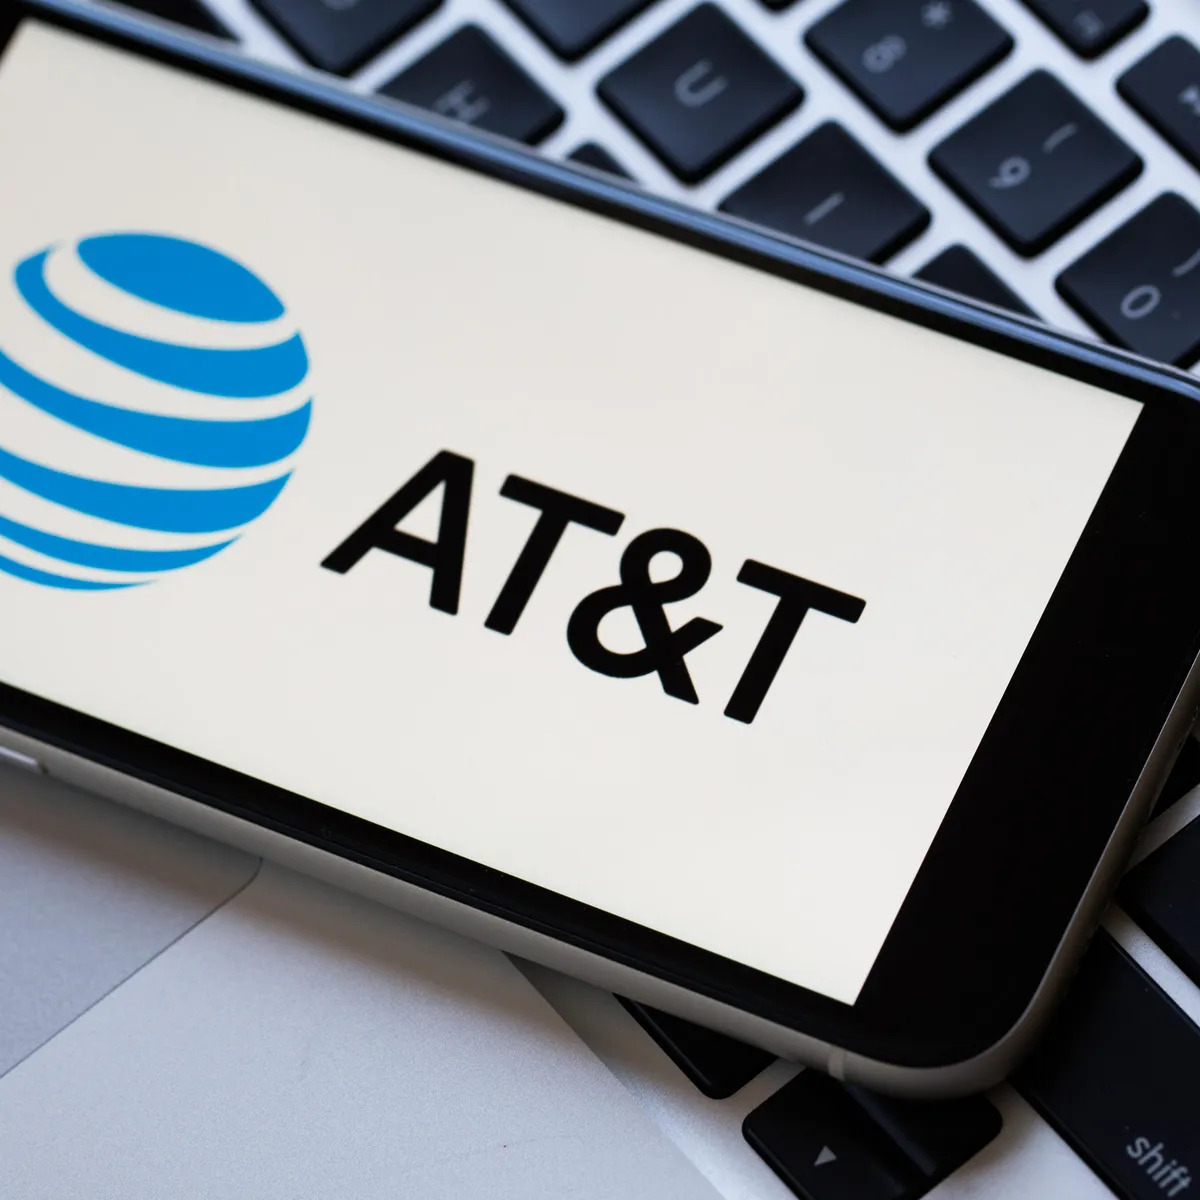 What Is AT&T’s Wireless Roaming Policy?